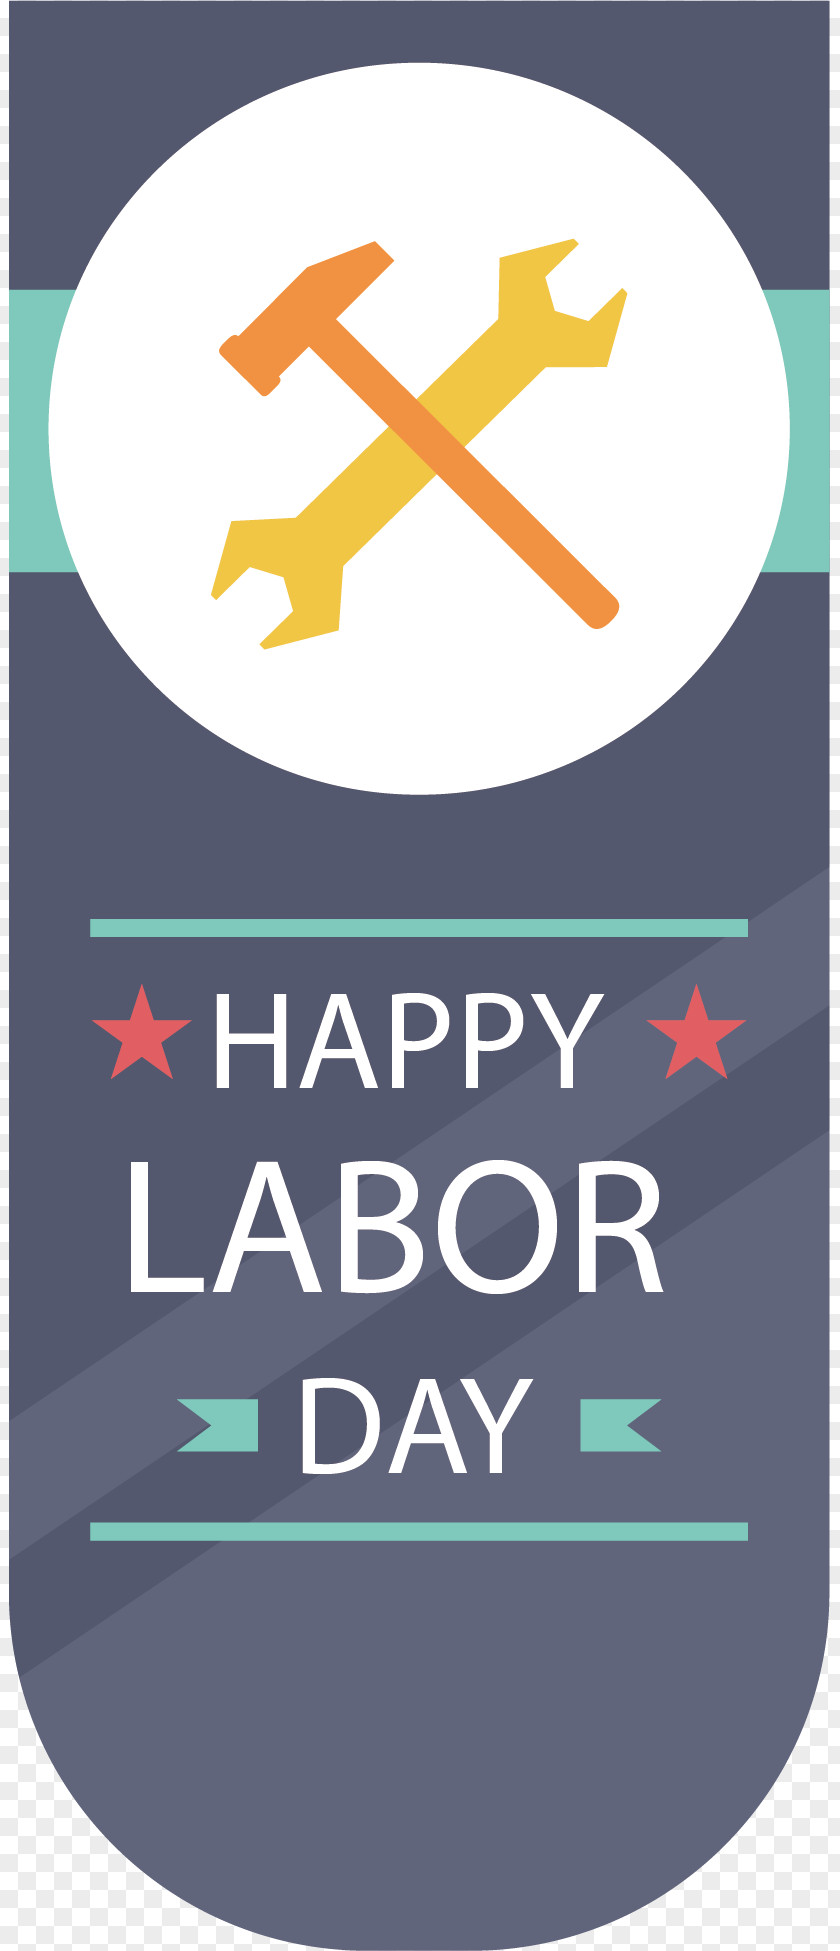 Cartoon Hammer Wrench Vector International Workers Day Labor Laborer Illustration PNG